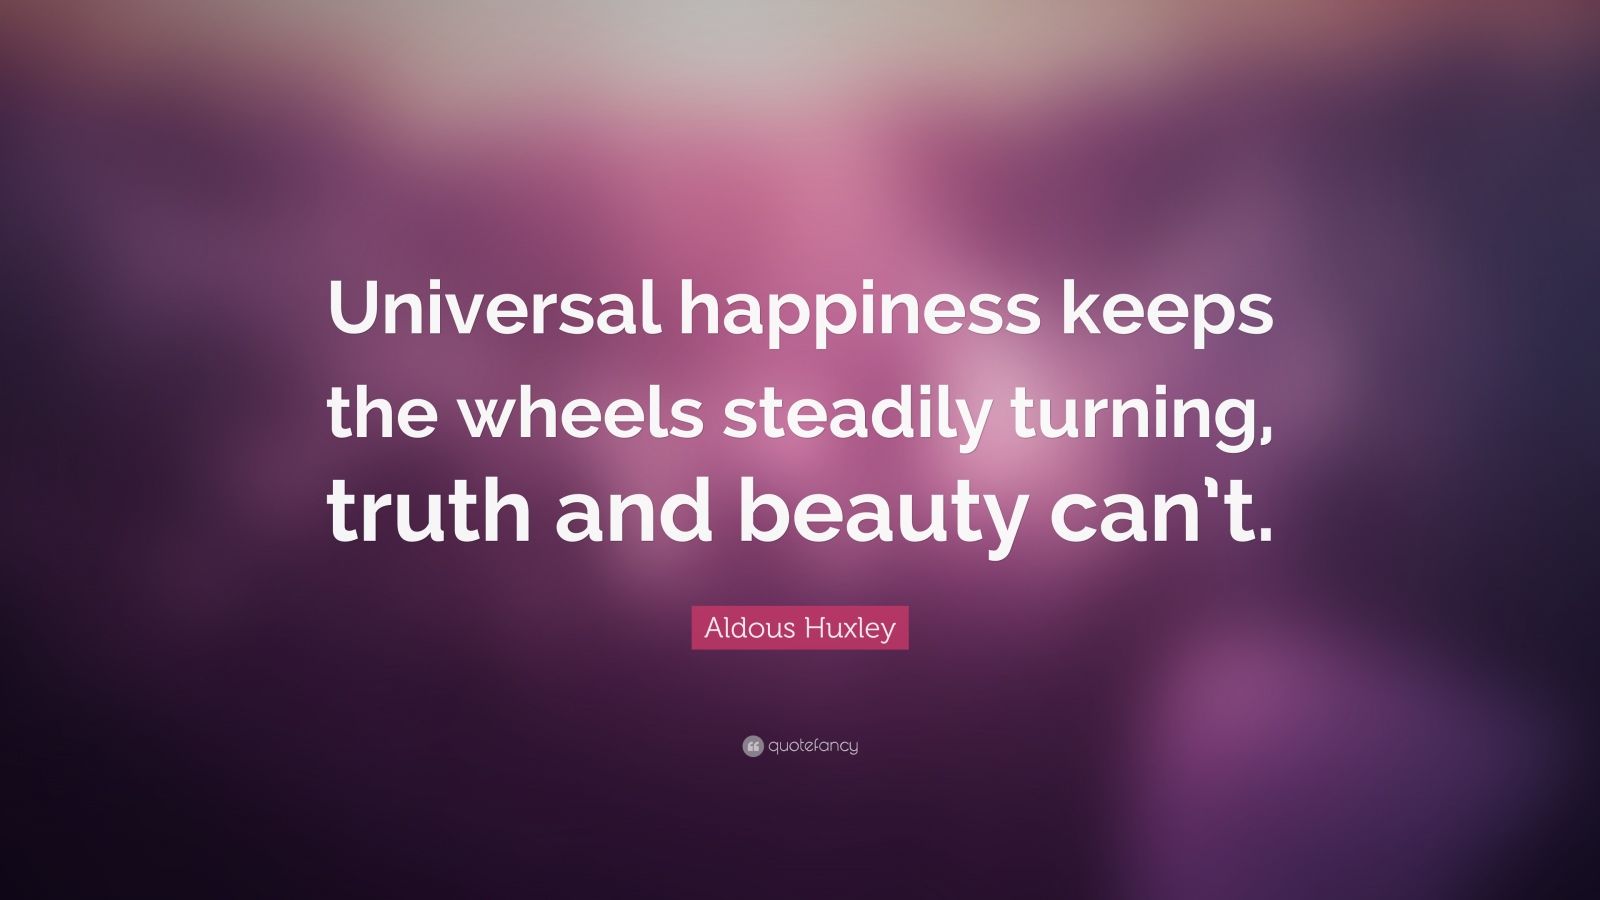 Aldous Huxley Quote: \u201cUniversal happiness keeps the wheels steadily turning, truth and beauty 